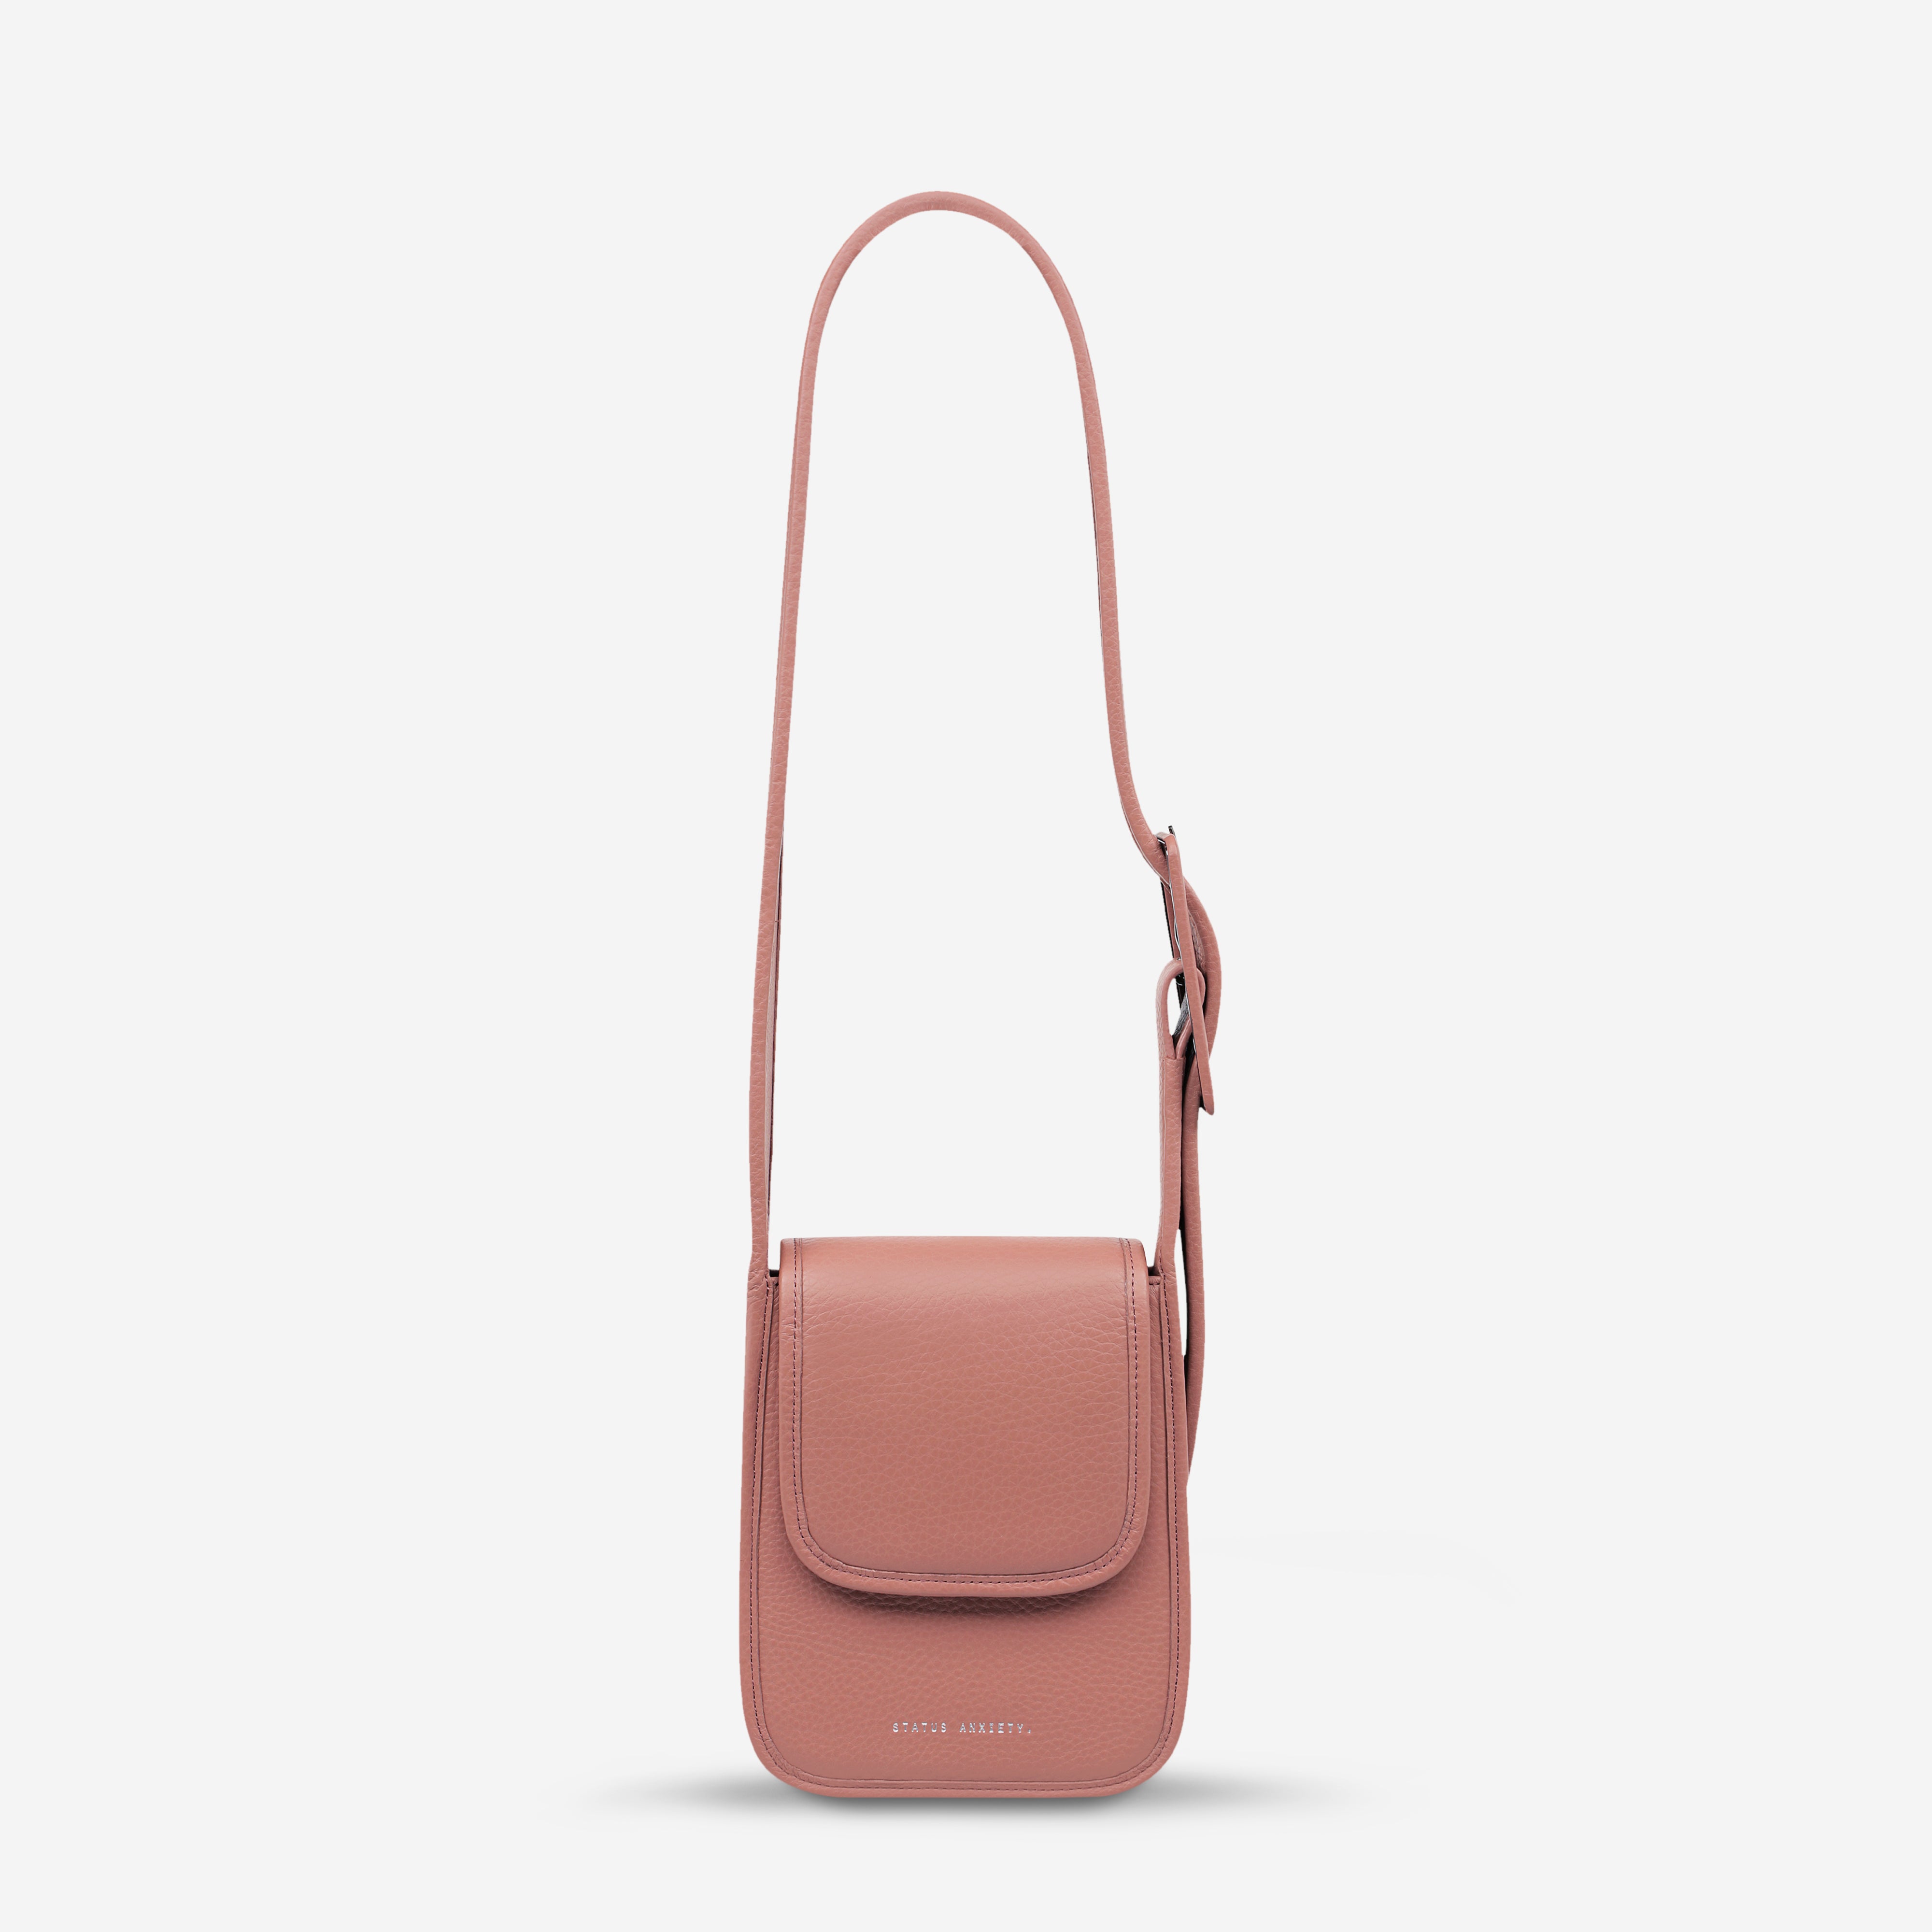 Status Anxiety Perplex Women's Leather Bag Dusty Rose